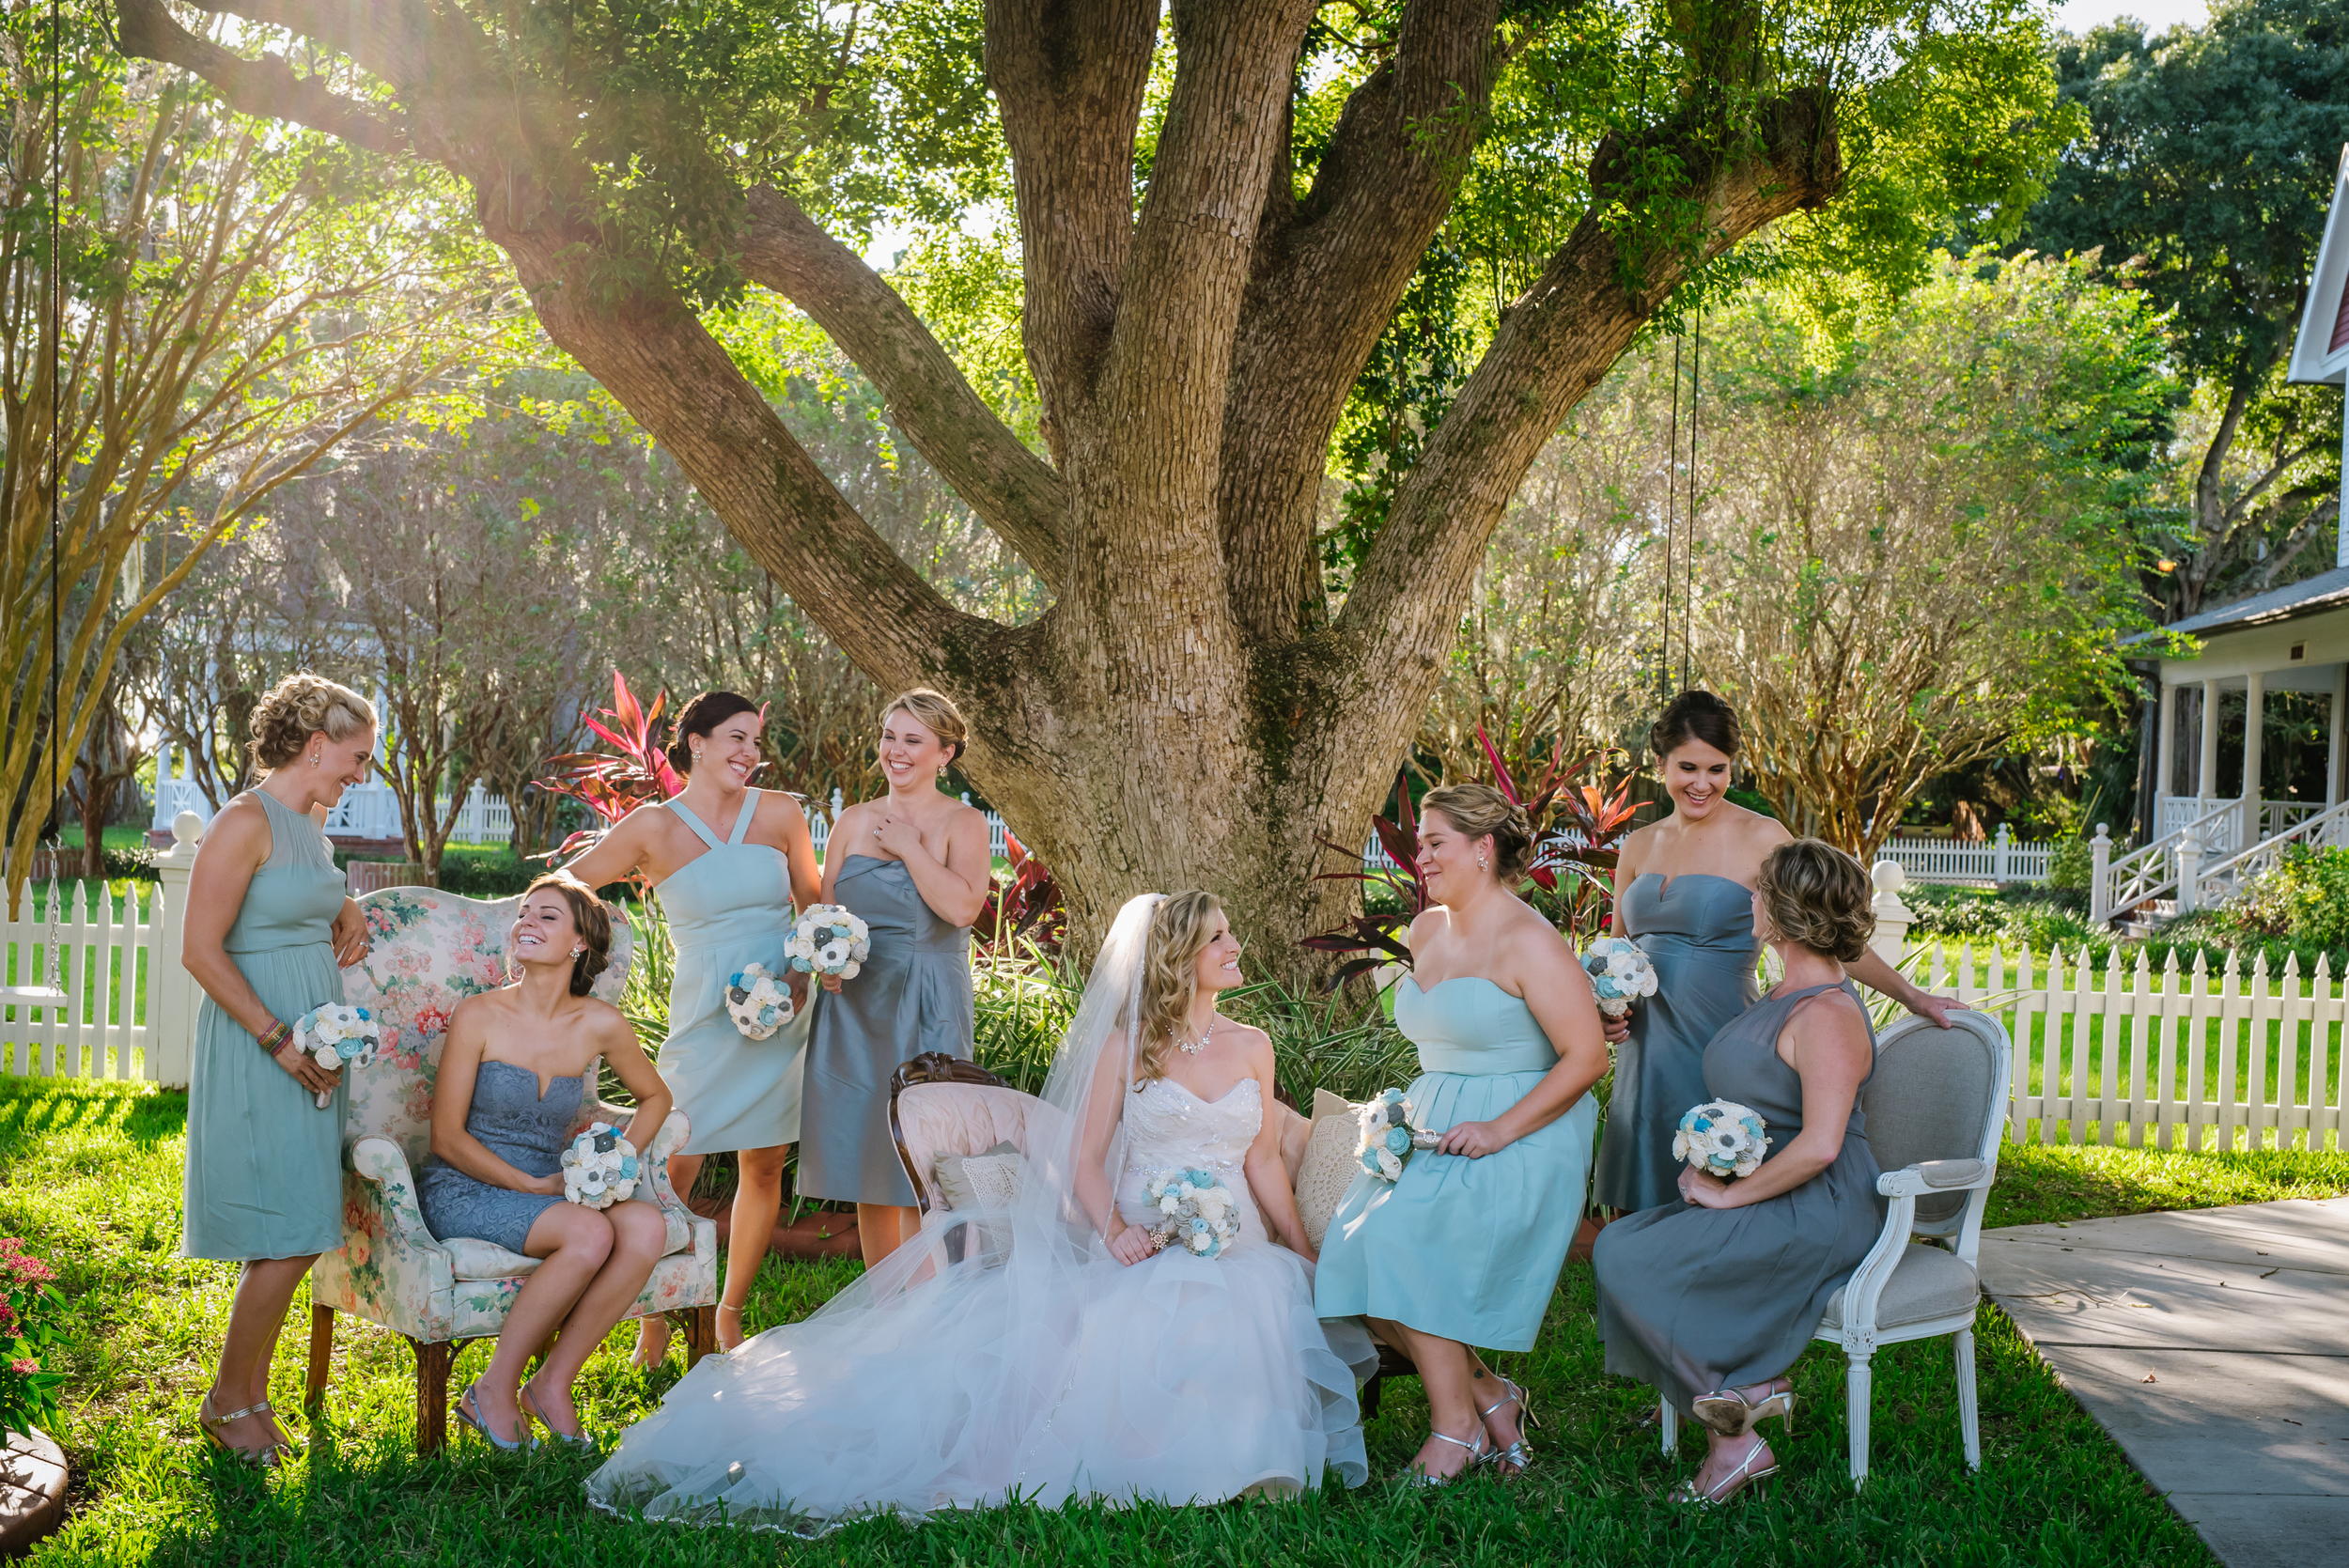 Megan and Derek had a perfectly blush and vintage wedding day surrounded by an awesome crew! I loved having fun with the girls and all of the prettiness!!